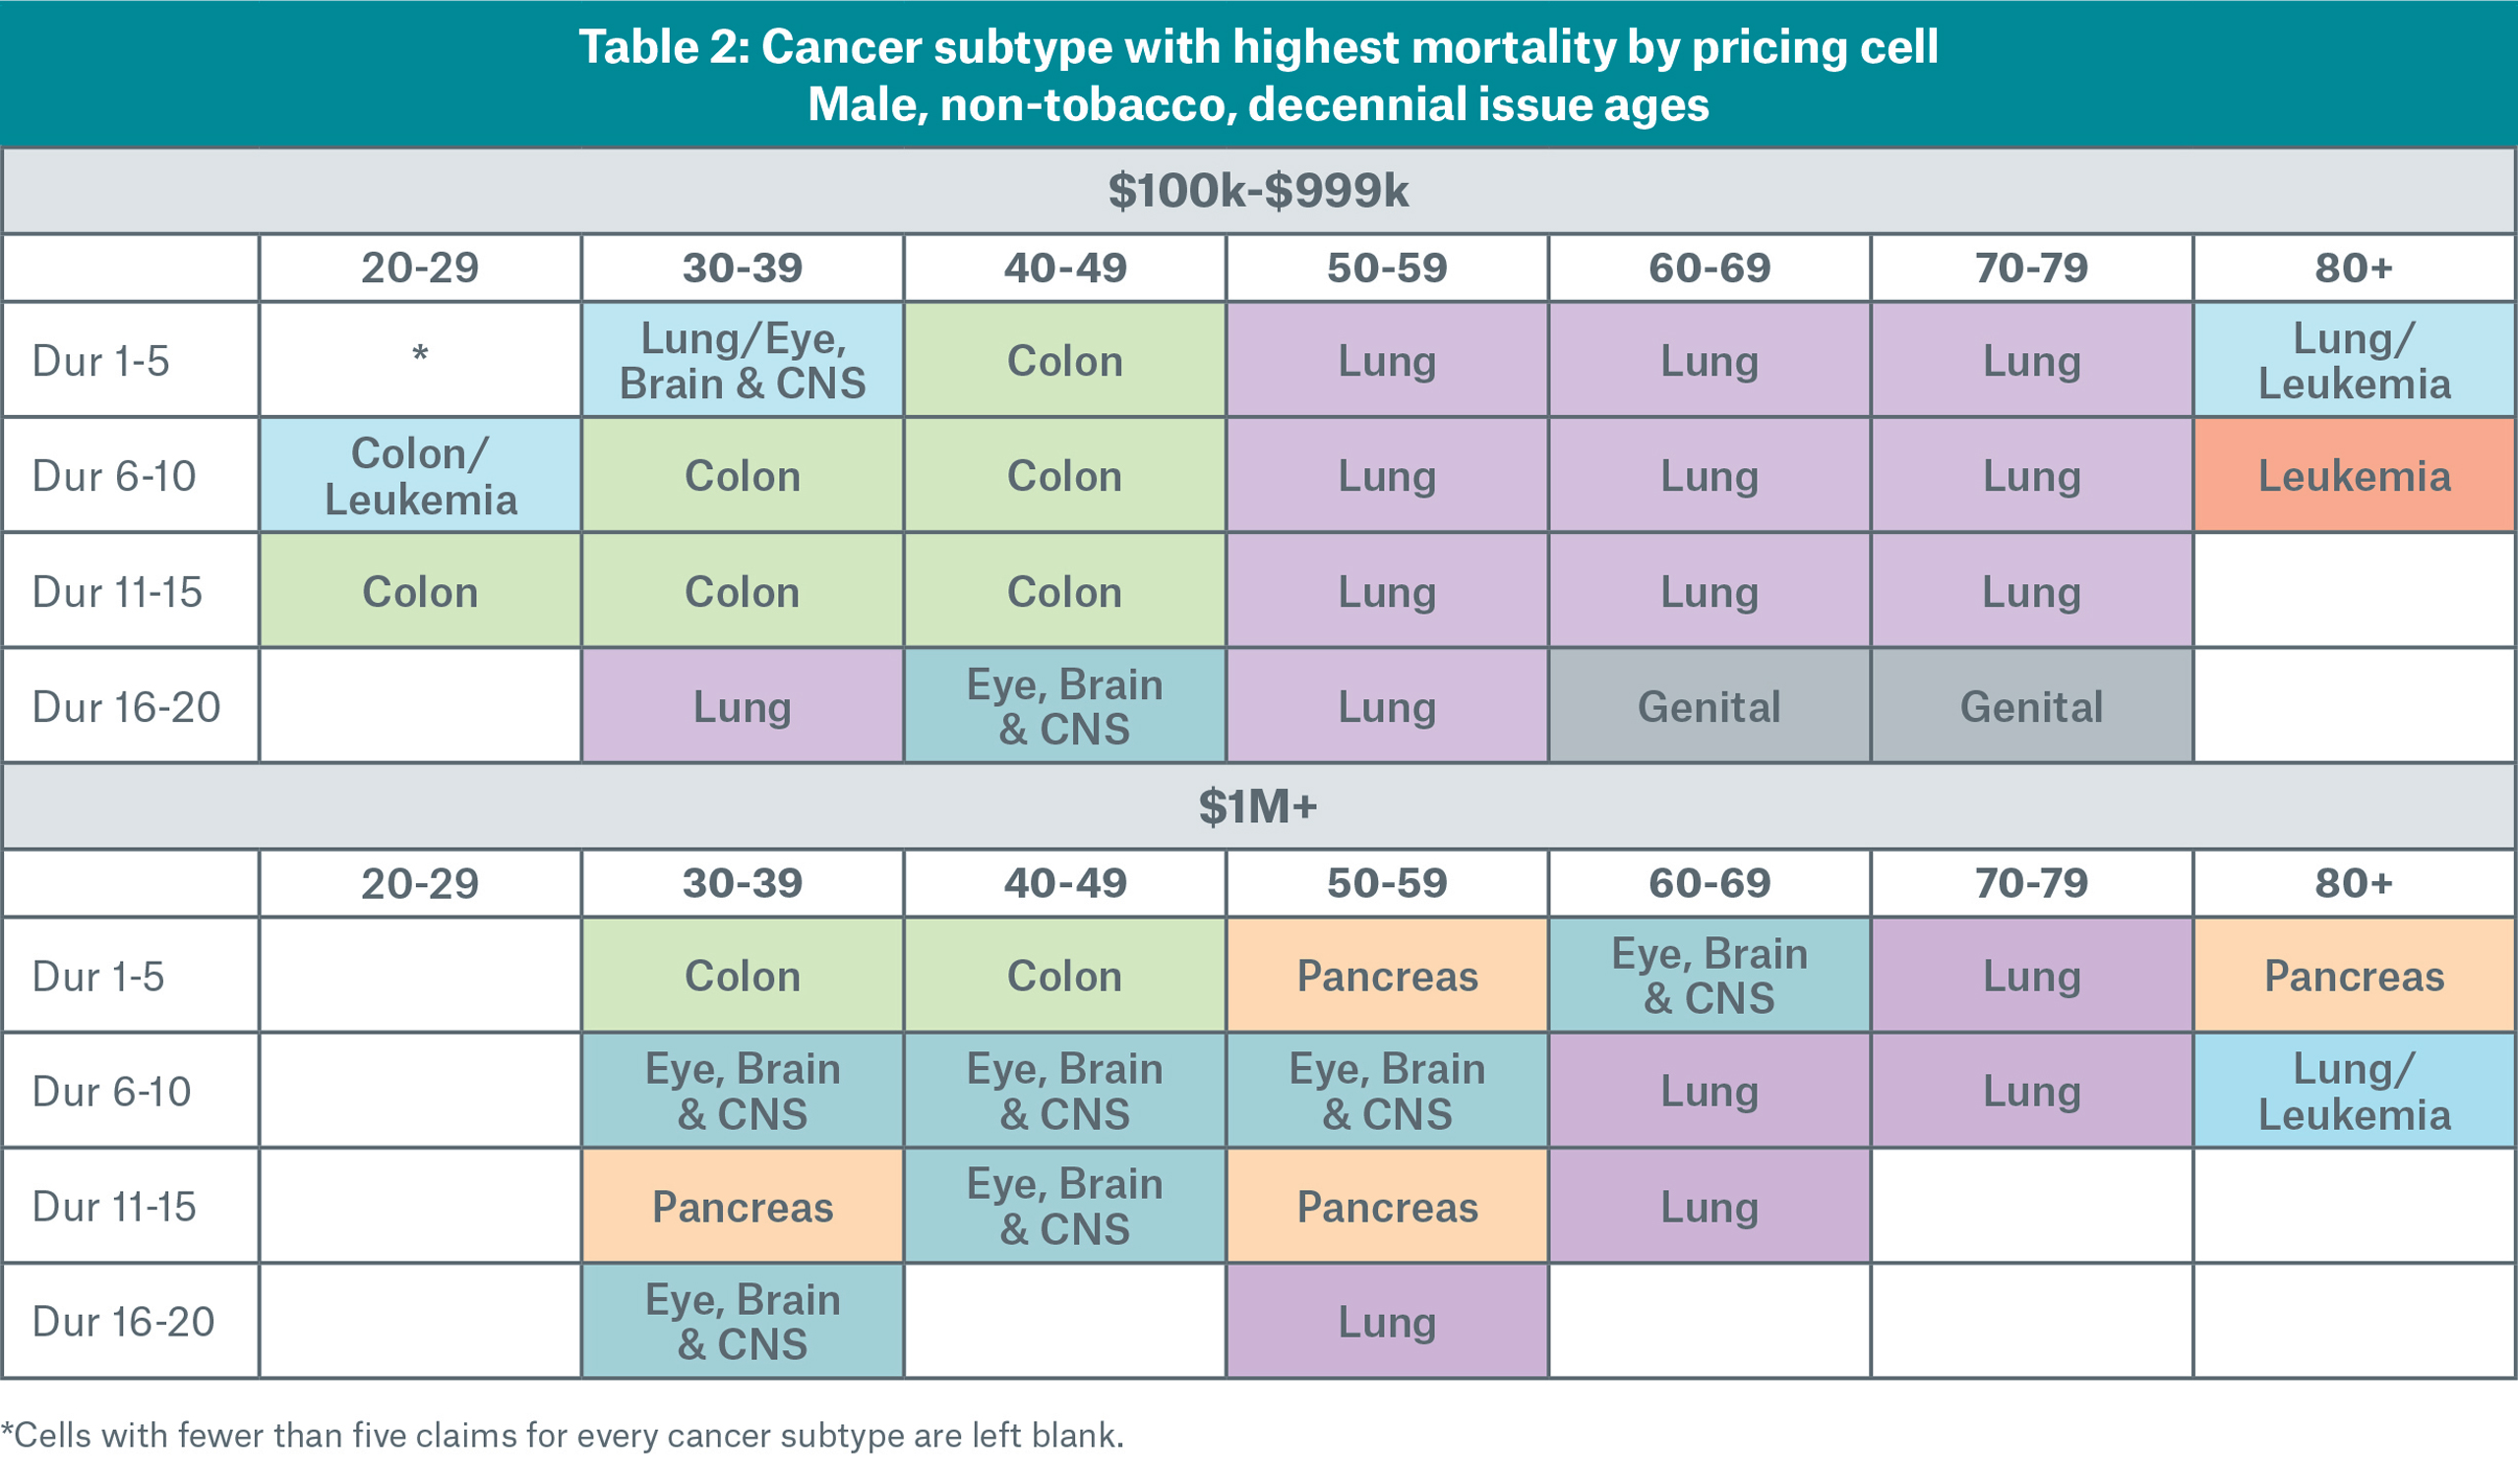 Table 2  Cancer subtype mortality - male